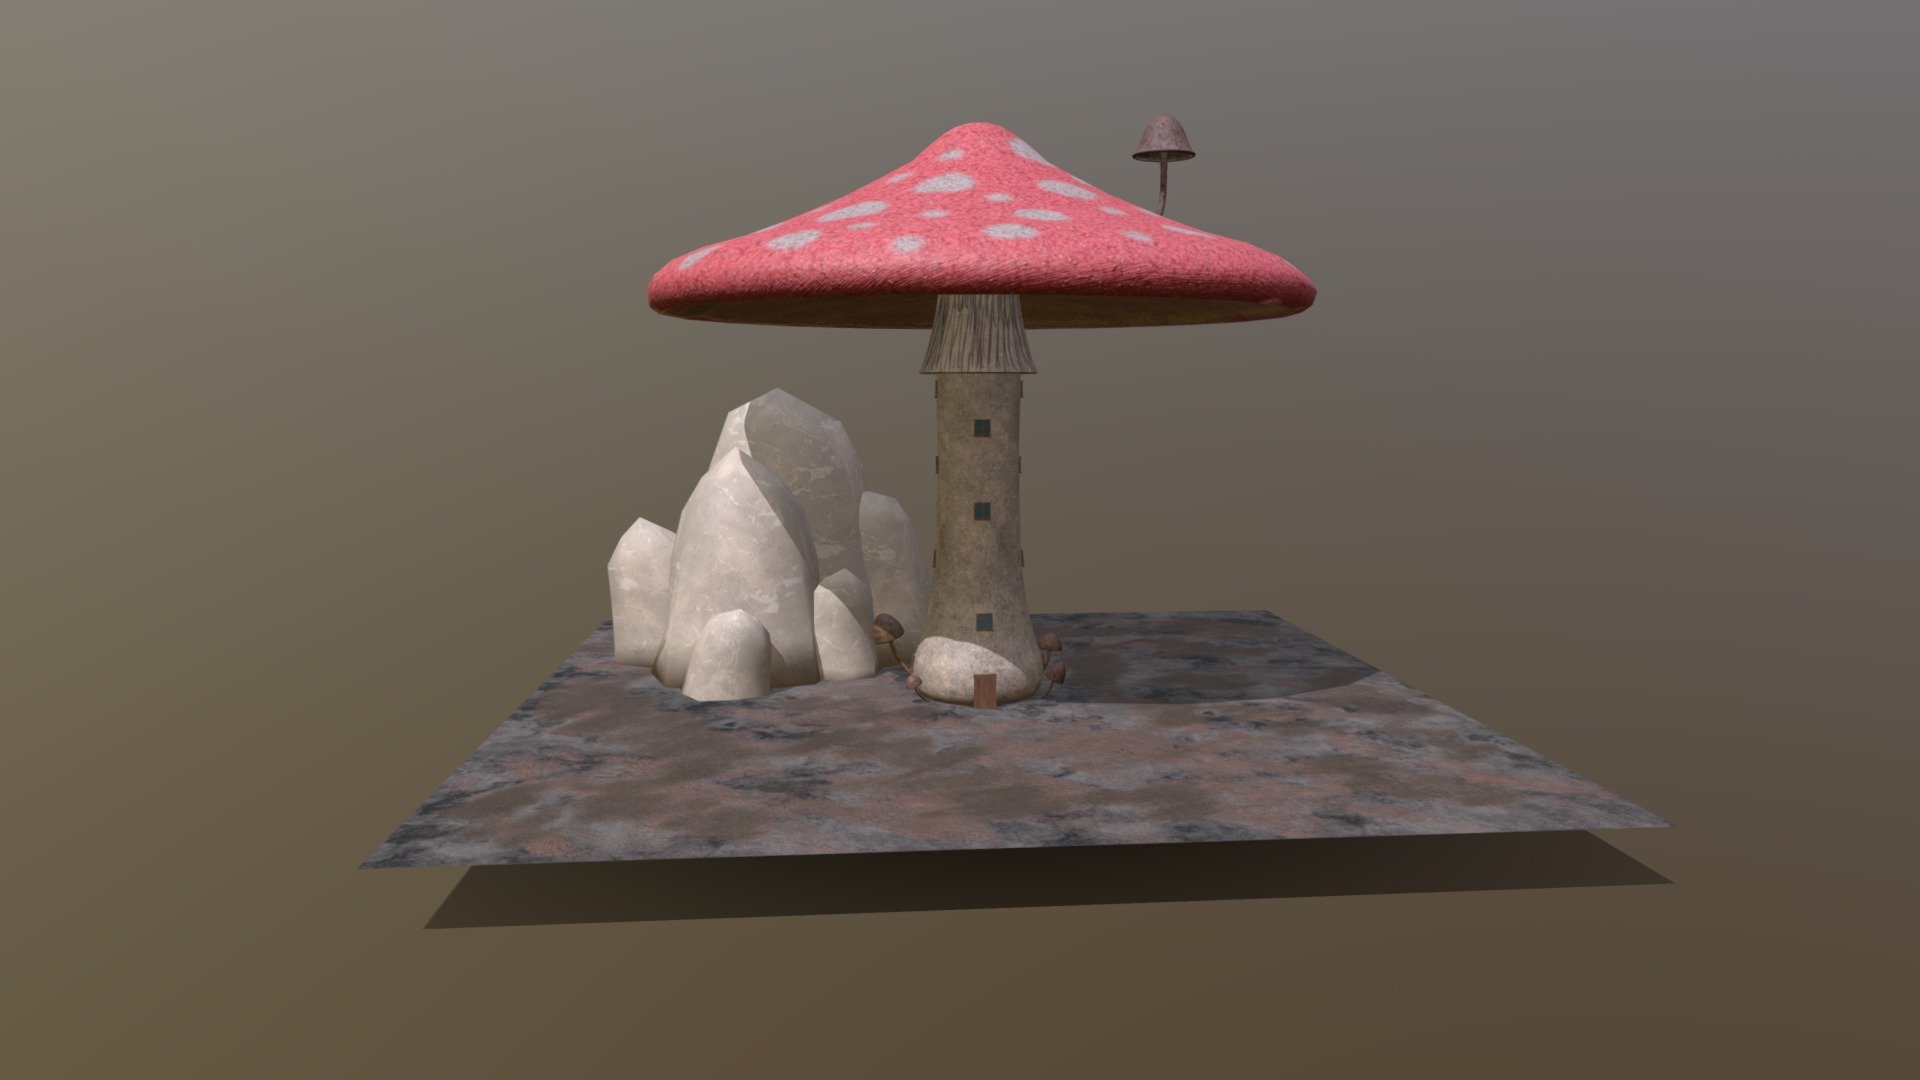 This is a Mushroom House that I have made for my Animation Coursework 3d model